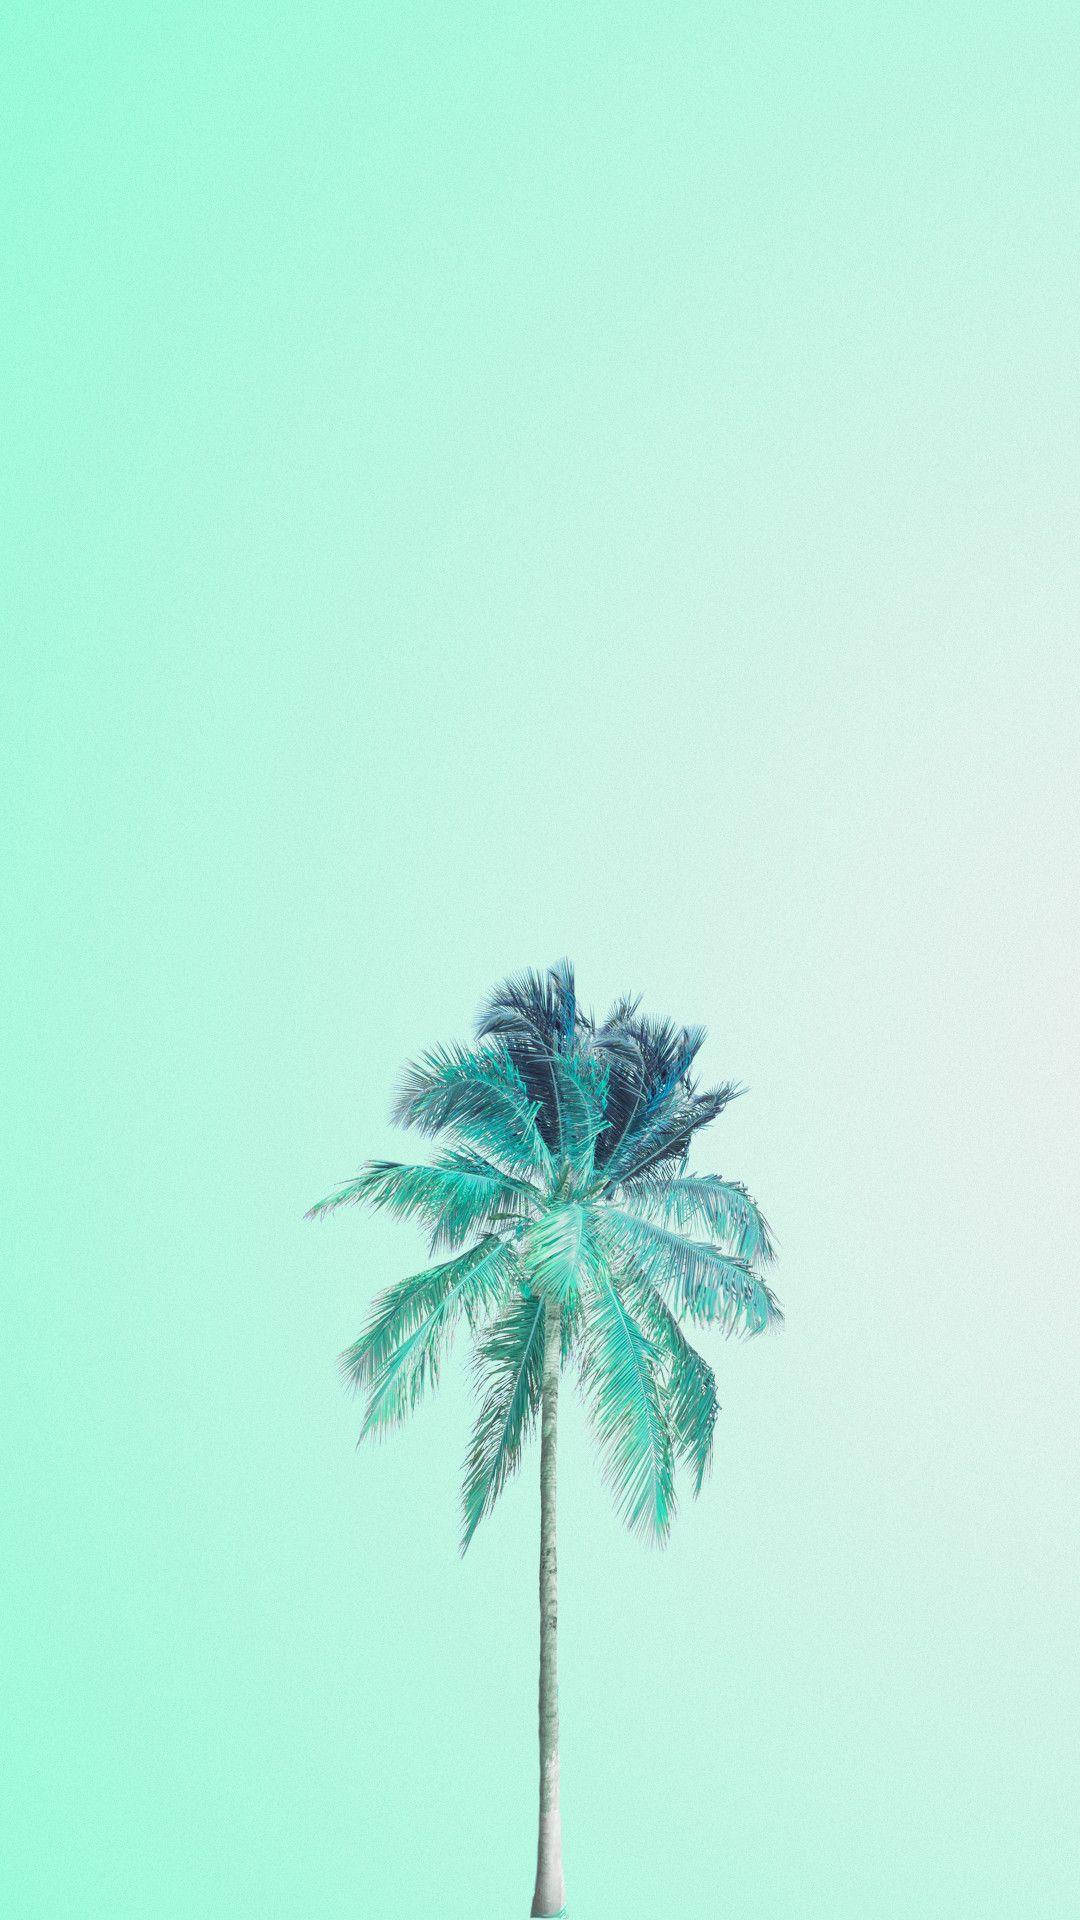 Aesthetic Palm Tree Mint Green Iphone Wallpaper